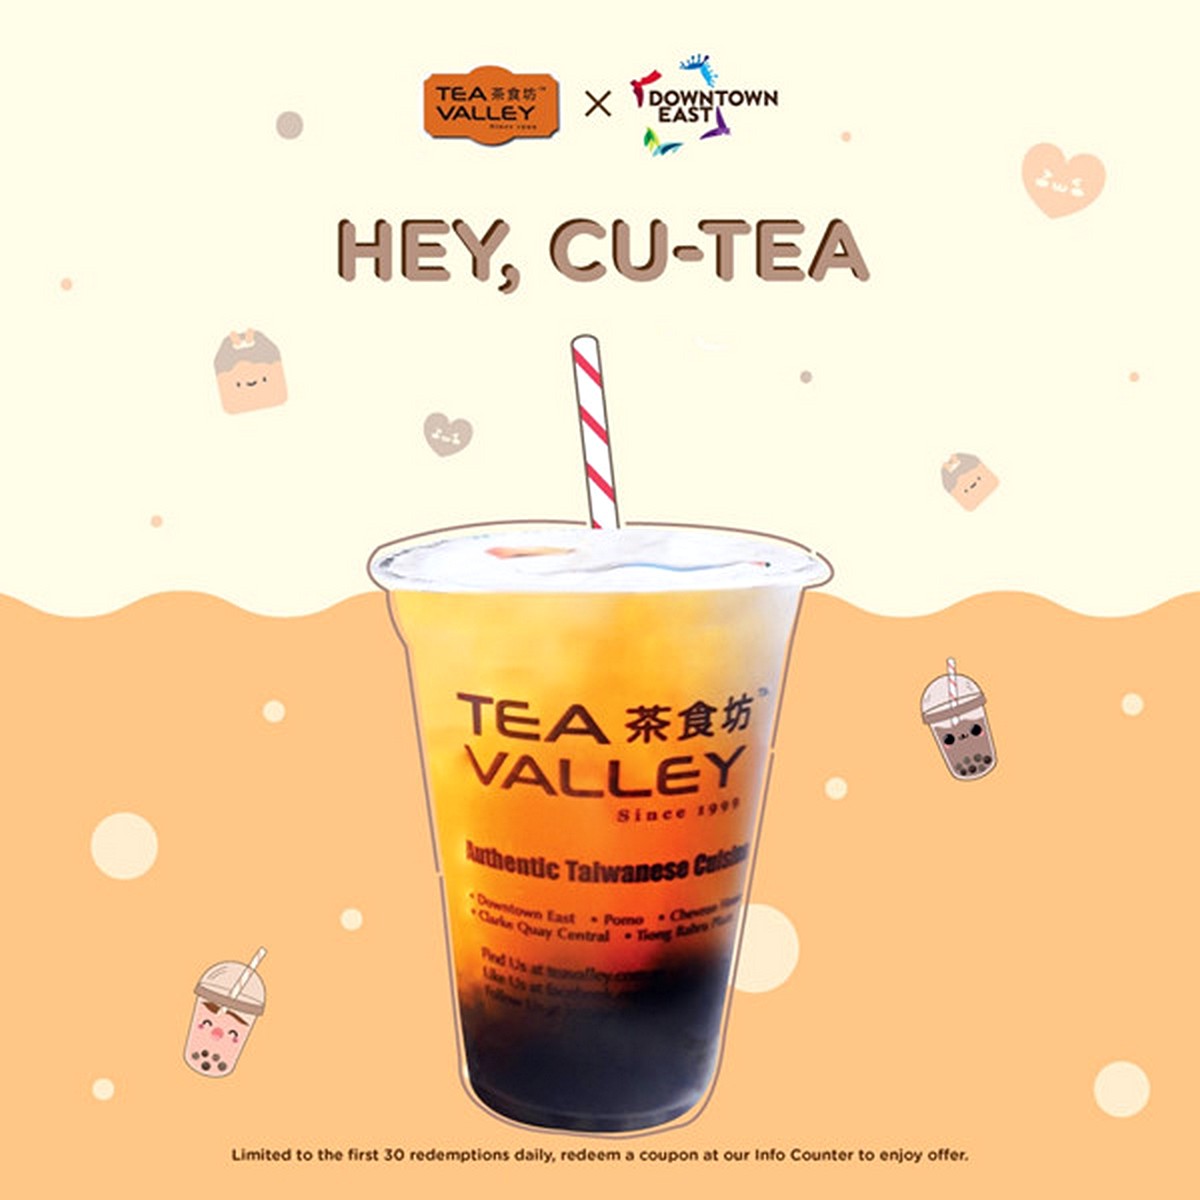 Downtown-East-Free-Bubble-Tea-Promotion-2020-Giveaway-Freebies-2021-Discounts-Offers-002 16-31 Mar 2020: Downtown East FREE Bubble Tea Promotion! KOI The, Kung Fu Tea, Each A Cup, Tea Valley & Yocha!